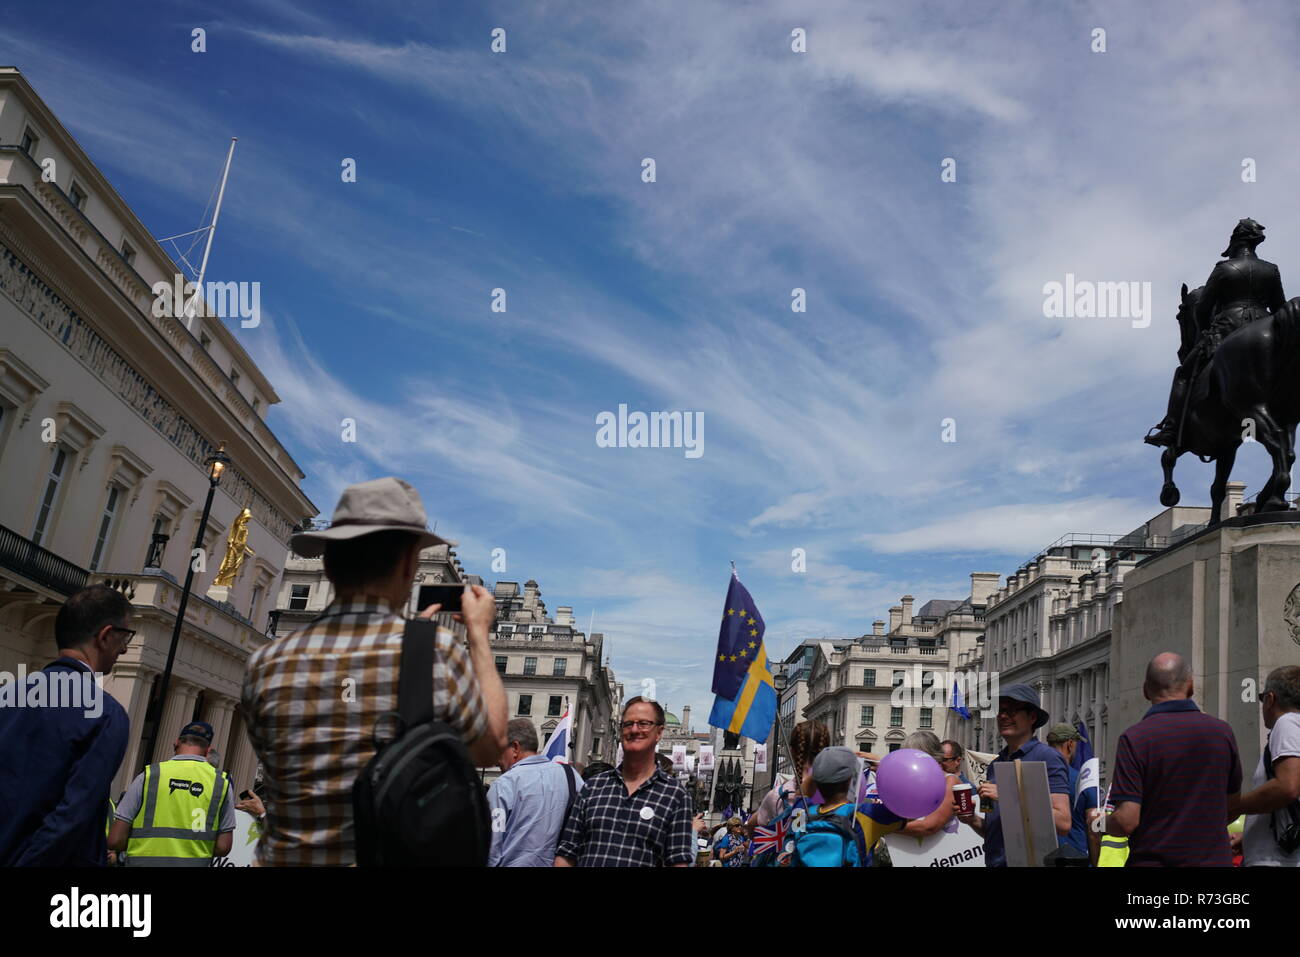 In June 2018 hundreds of thousands of people turned up to the Peoples Vote March in London to voice their opinion on Brexit. Stock Photo